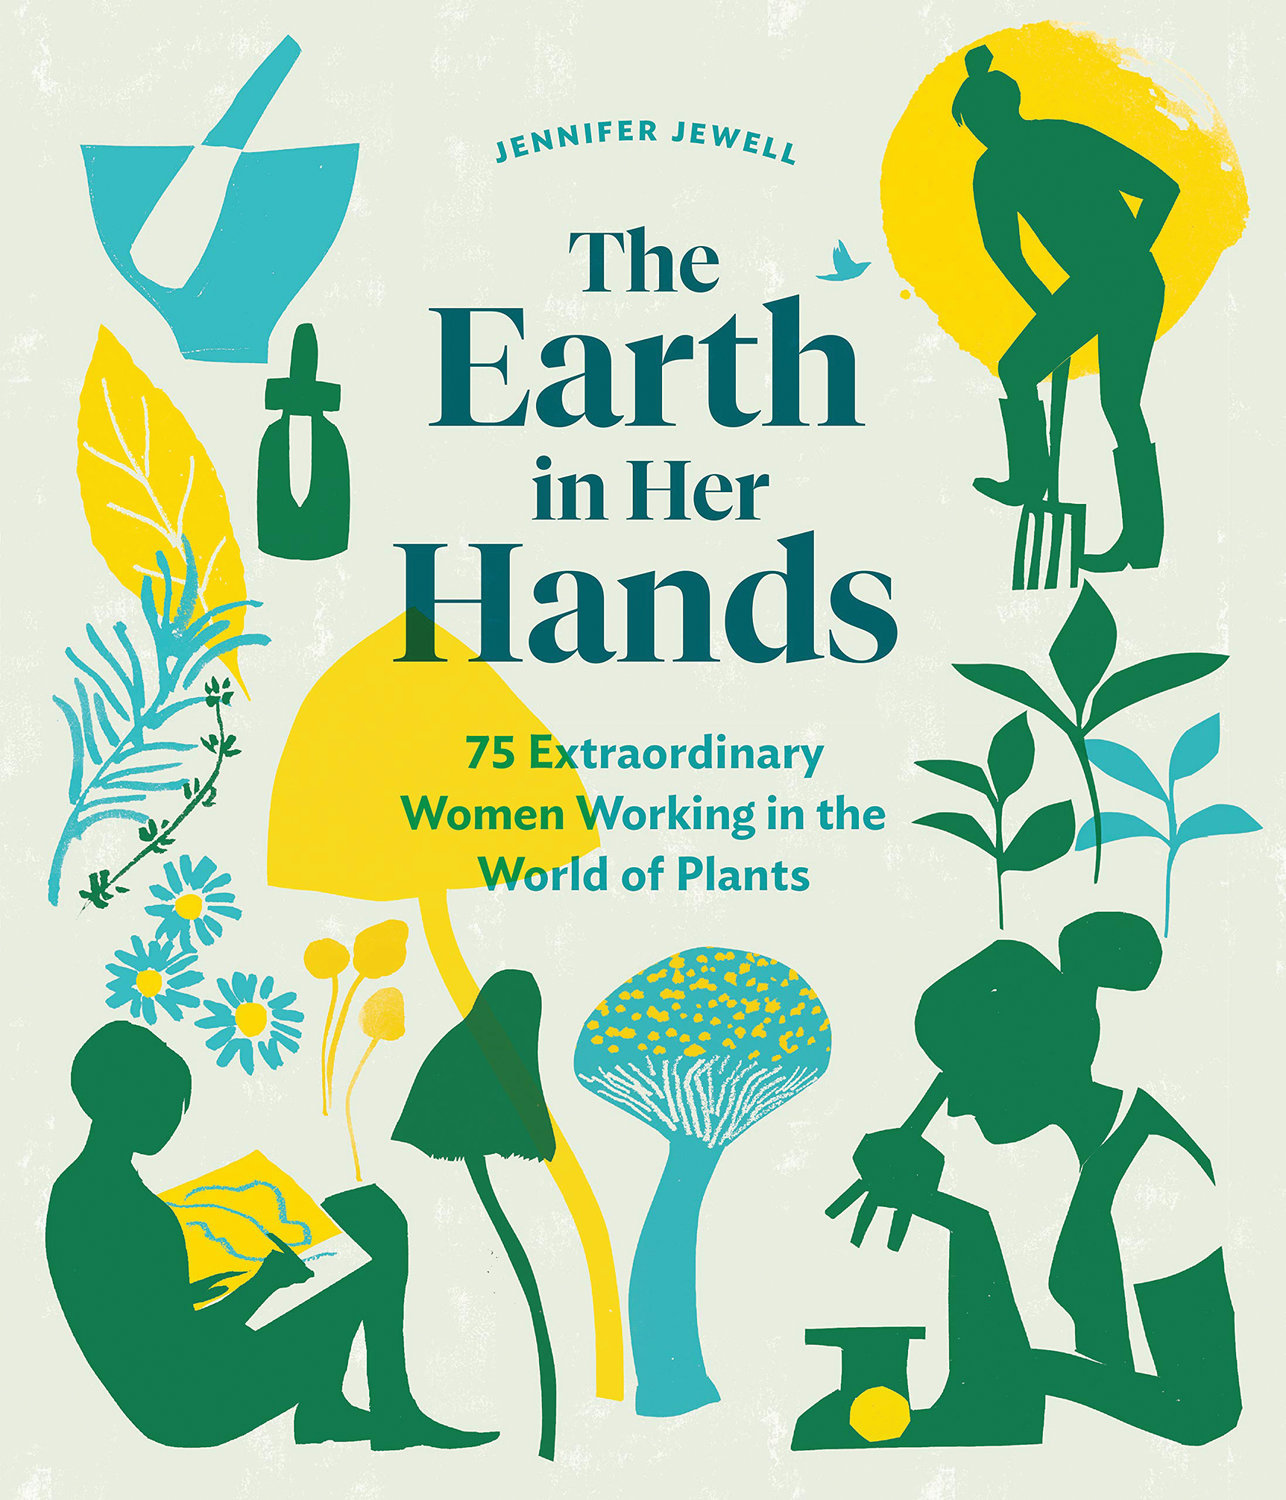 Cara Loriz was featured in Jennifer Jewell’s book, “The Earth in Her Hands: 75 Extraordinary Women Working in the World of Plants.”